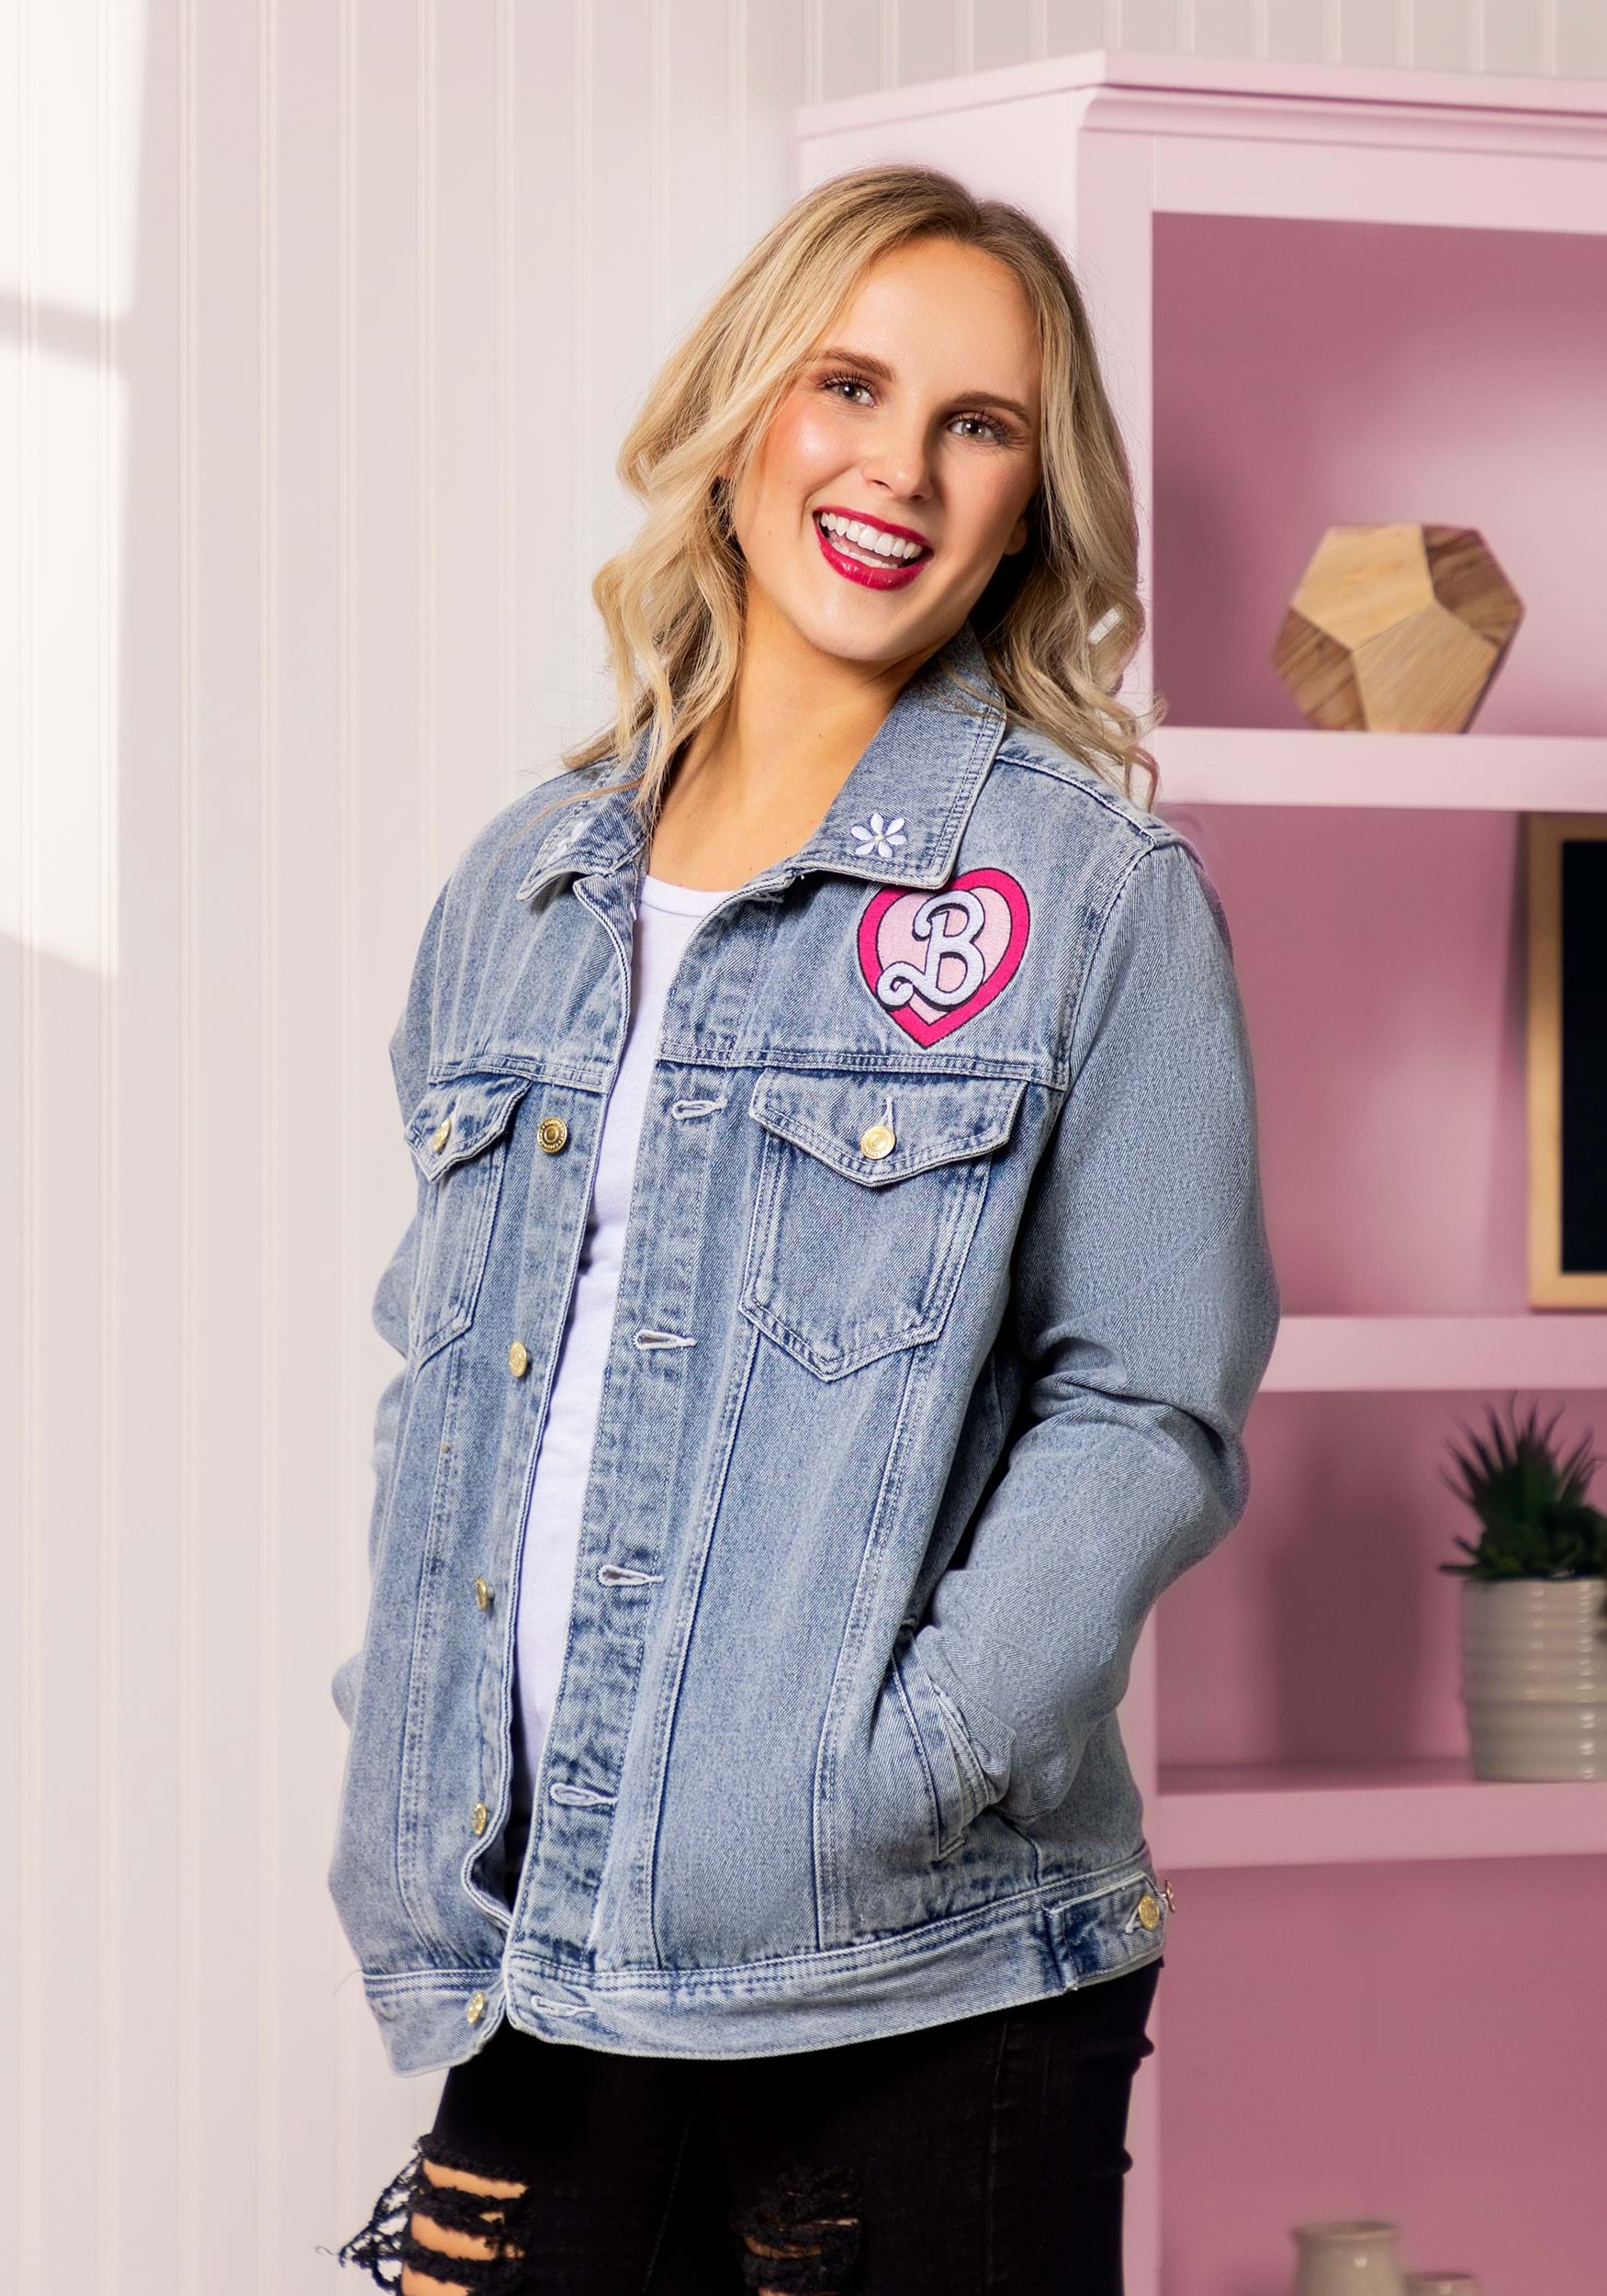 Barbie Pink Checkered Jacket - Clearance Item